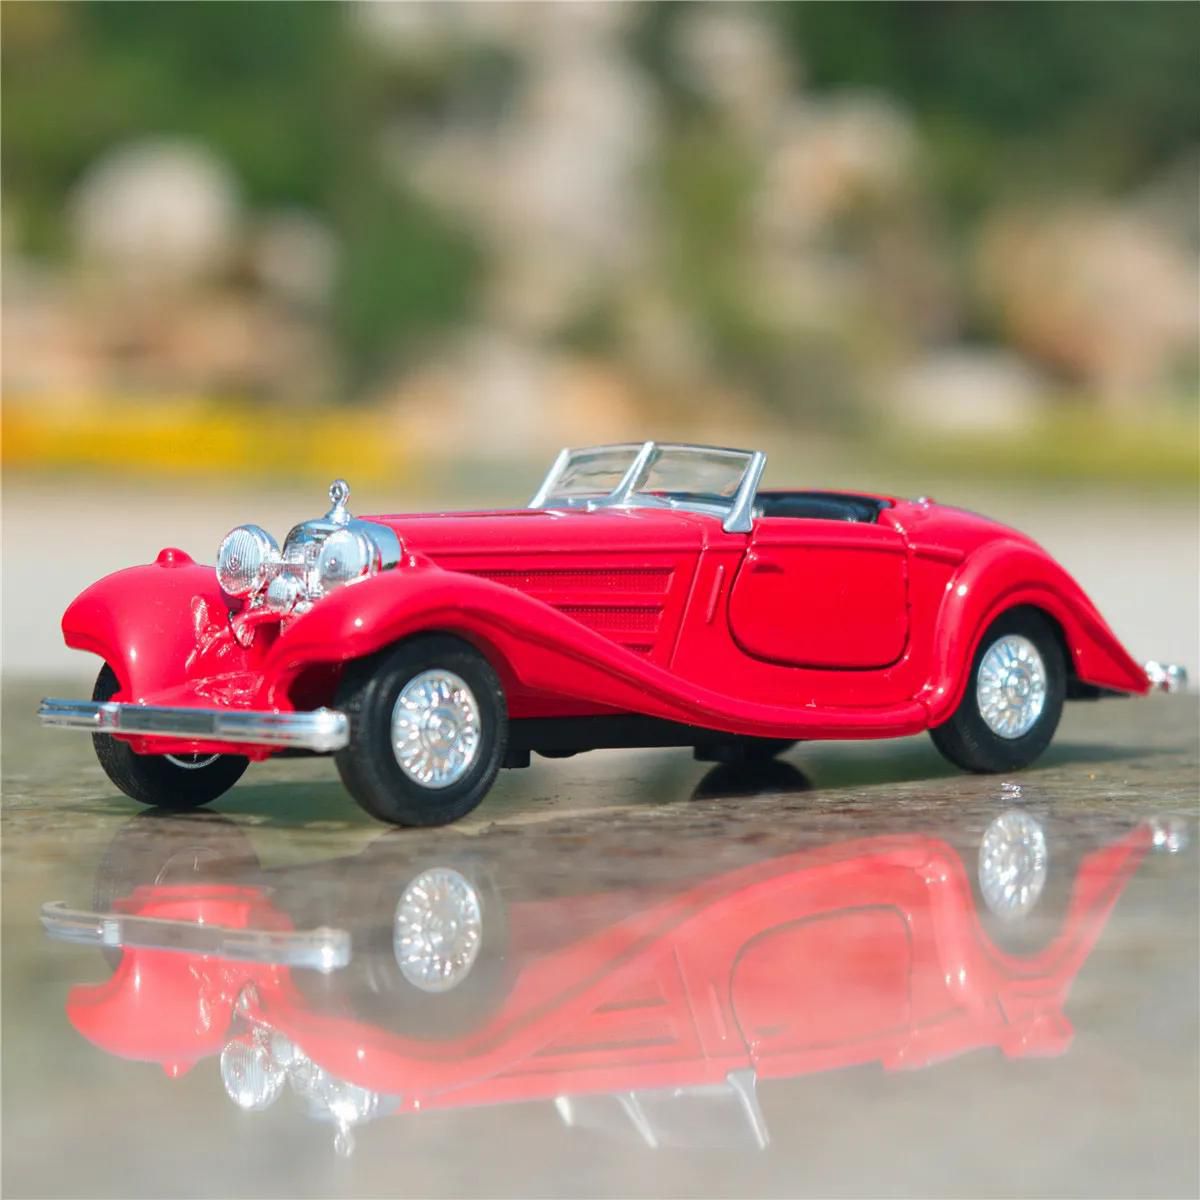 1:36 1936 Mercedes Benz 500K Alloy Car Model Diecast Metal Toy Classic Car Model Pull Back Simulation Collection Kids Gift